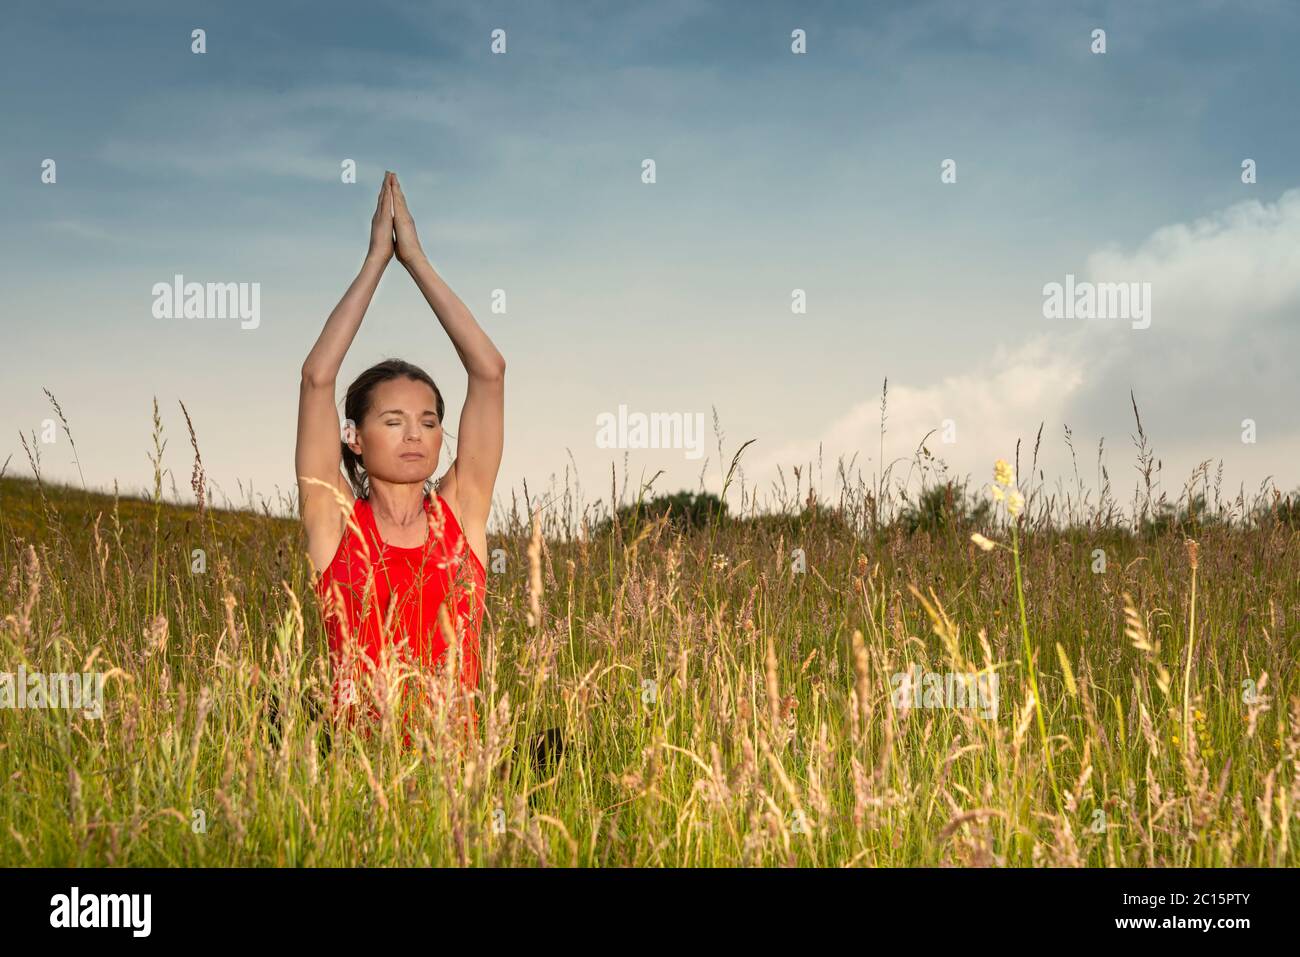 Woman practicing yoga in a field of wild flowers and grass, healthy lifestyle concept. Stock Photo